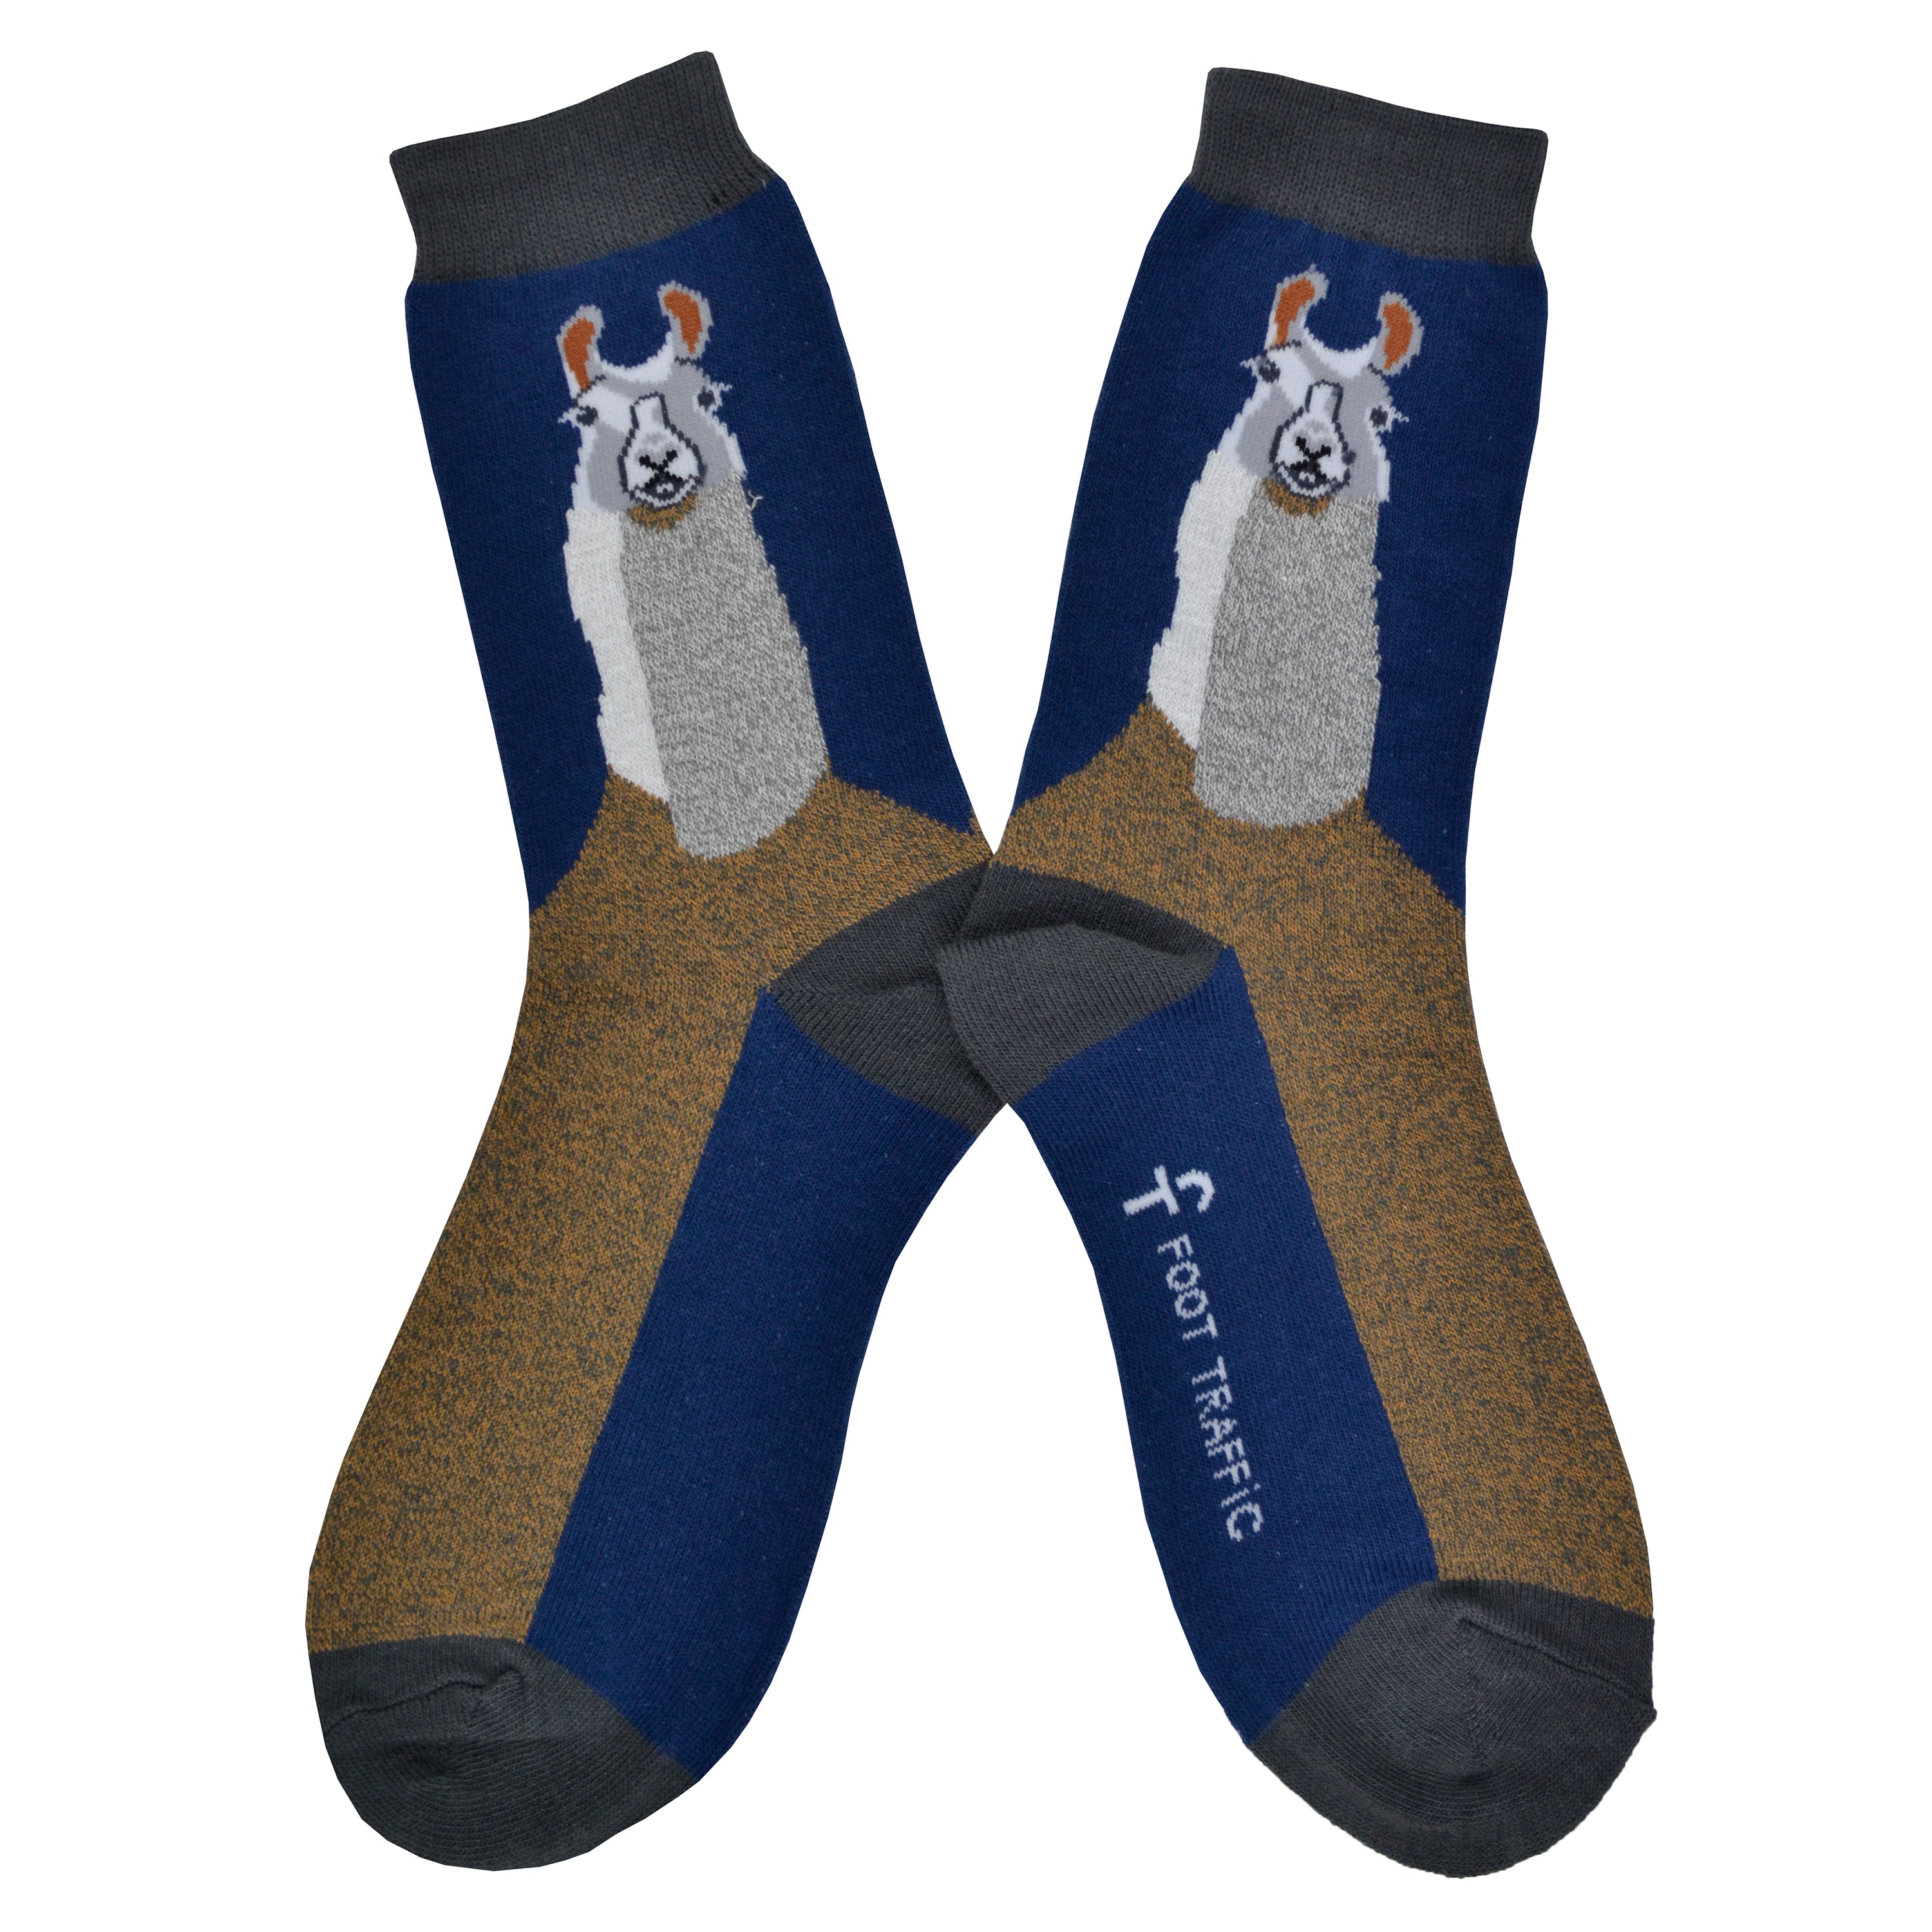 Shown in a flatlay, a pair of women's crew socks with a grey heel, toe, and cuff. The leg of the sock features a navy blue background and the face and neck of a llama. The foot of the sock is brown with a navy blue sole.